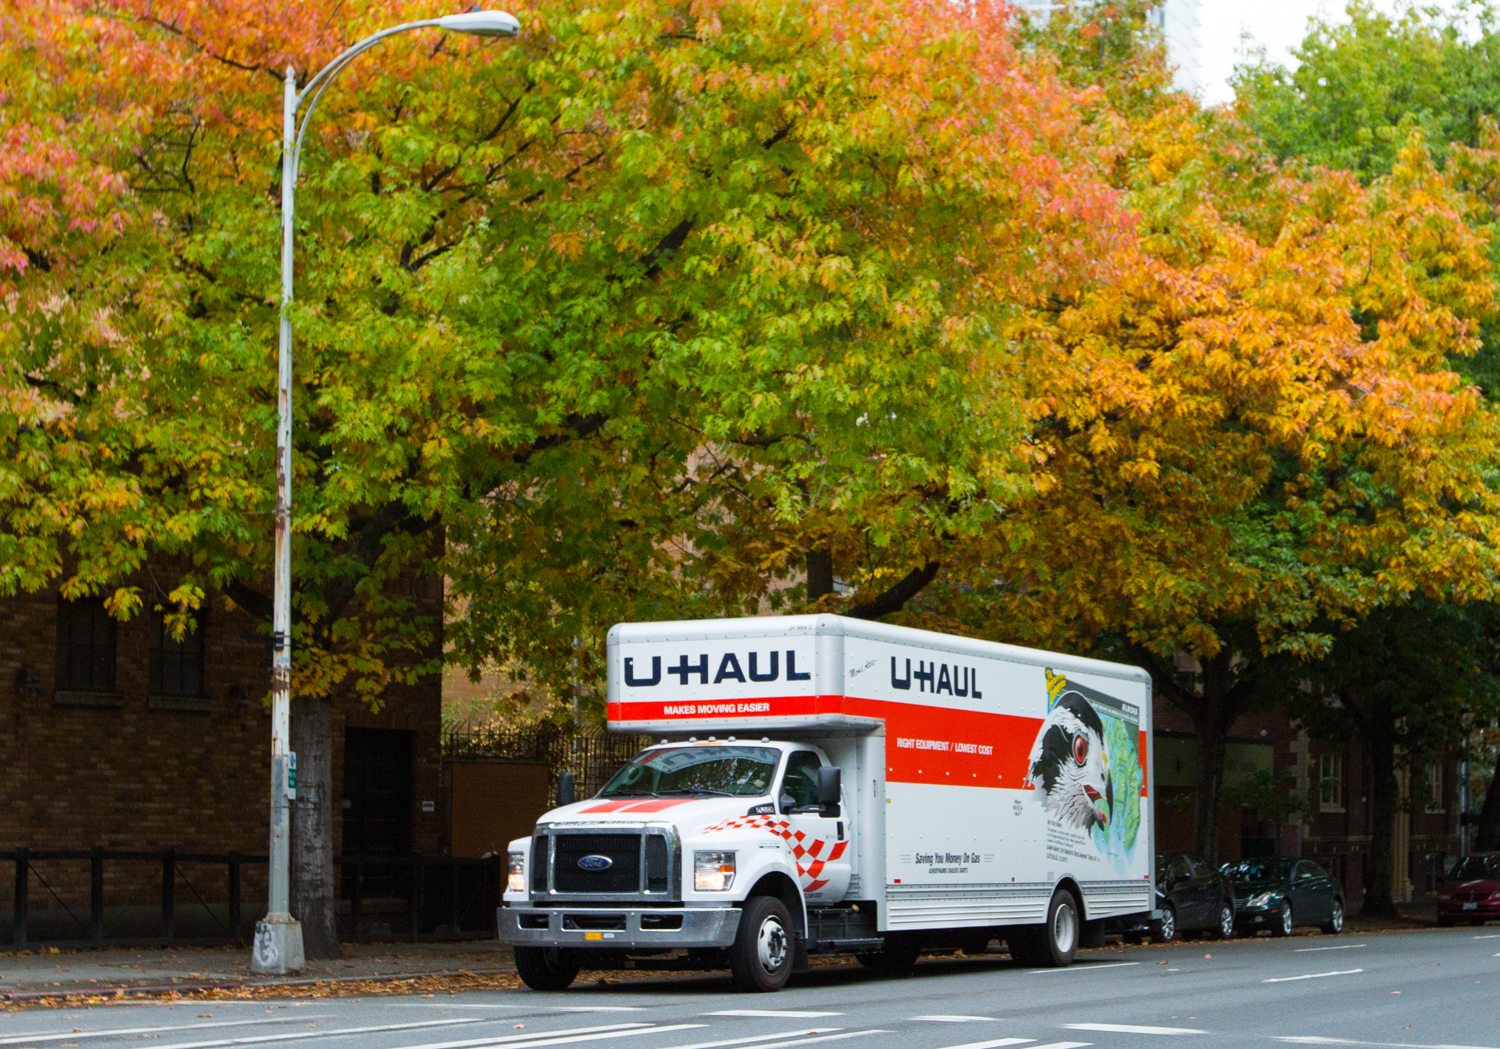 How Much for a Uhaul Truck Rental Service You Should Pay?